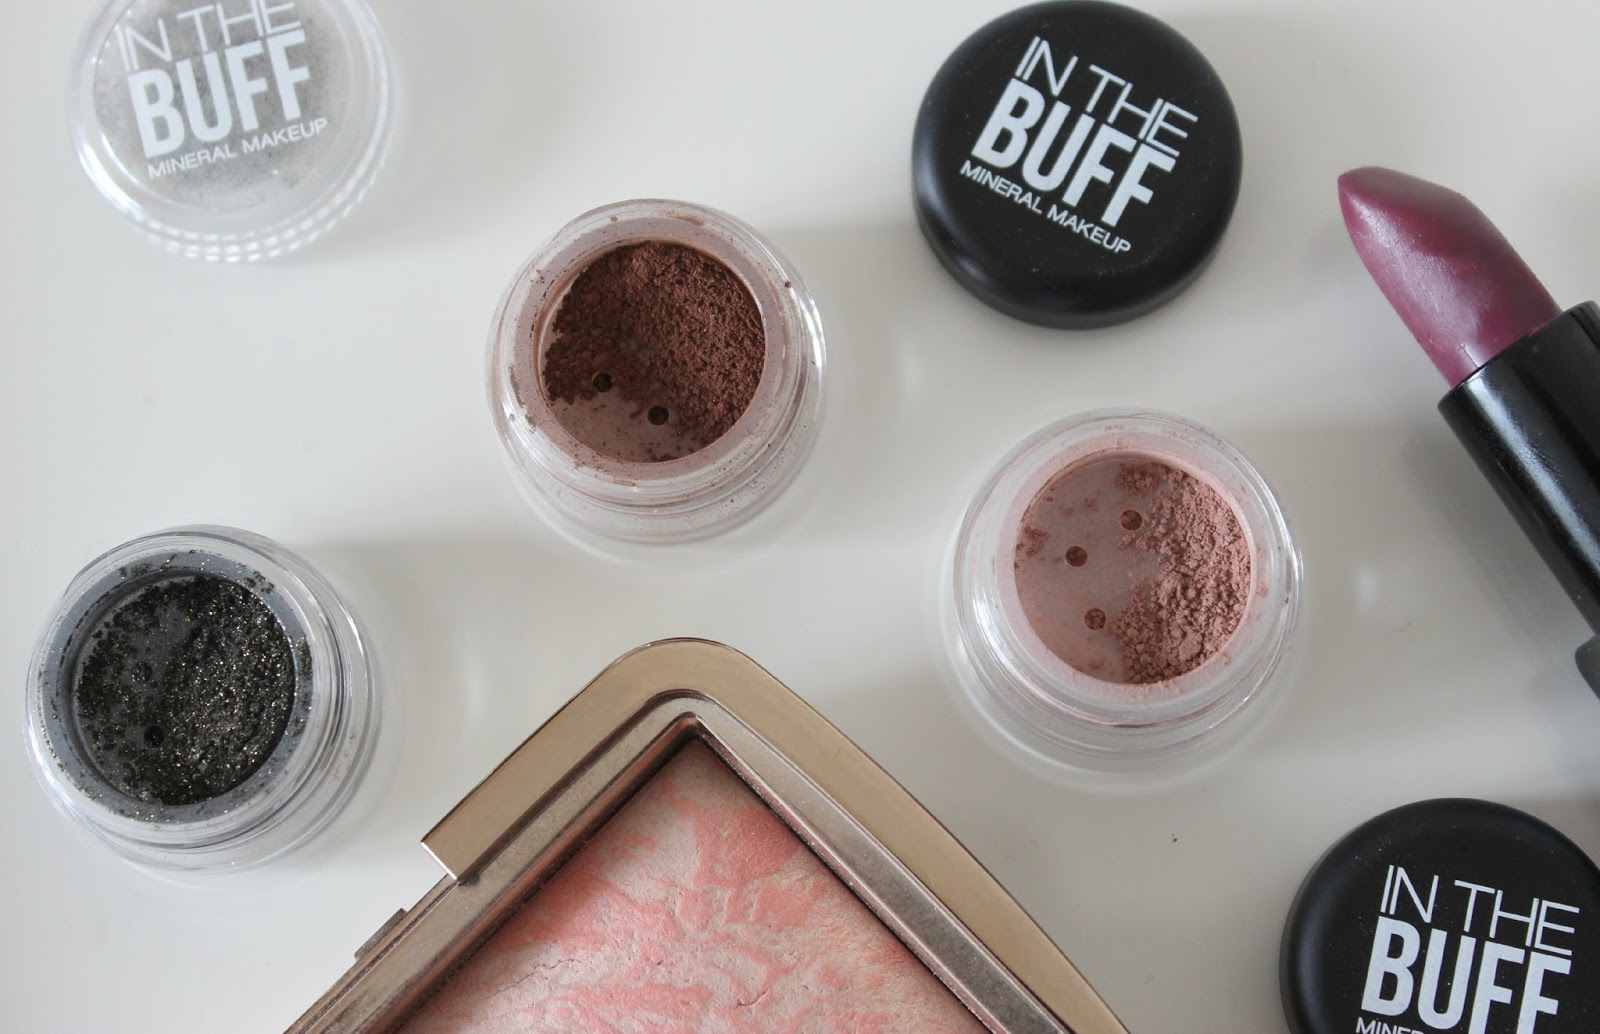 A picture of In The Buff mineral eyeshadows in Dark Skies, Baked Earth and Earth